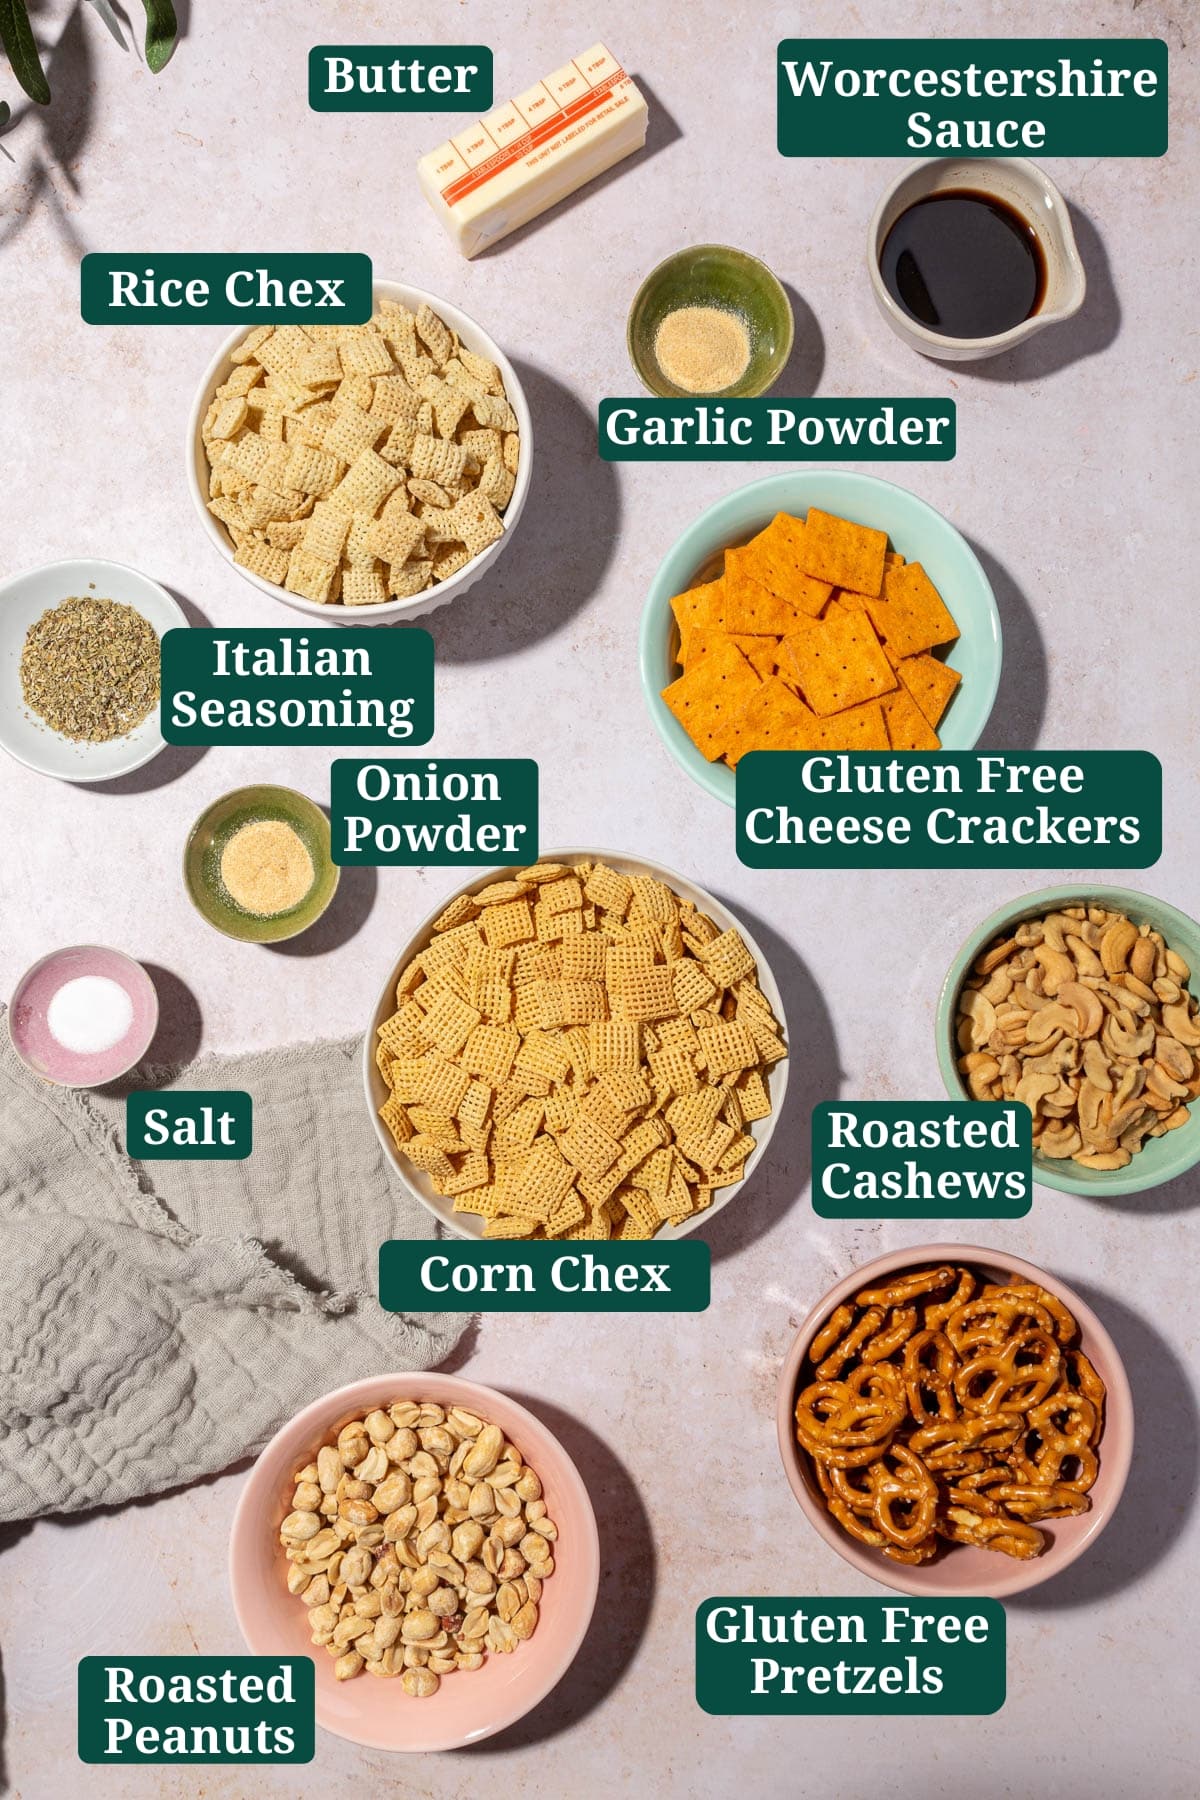 An overhead view of ingredients in small bowls to make gluten-free chex mix at home including corn chex, rice chex, gluten-free pretzels, gluten-free cheese crackers, cashews, peanuts, butter, garlic powder, onion powder, salt, and Italian seasoning with text overlays over each ingredient.